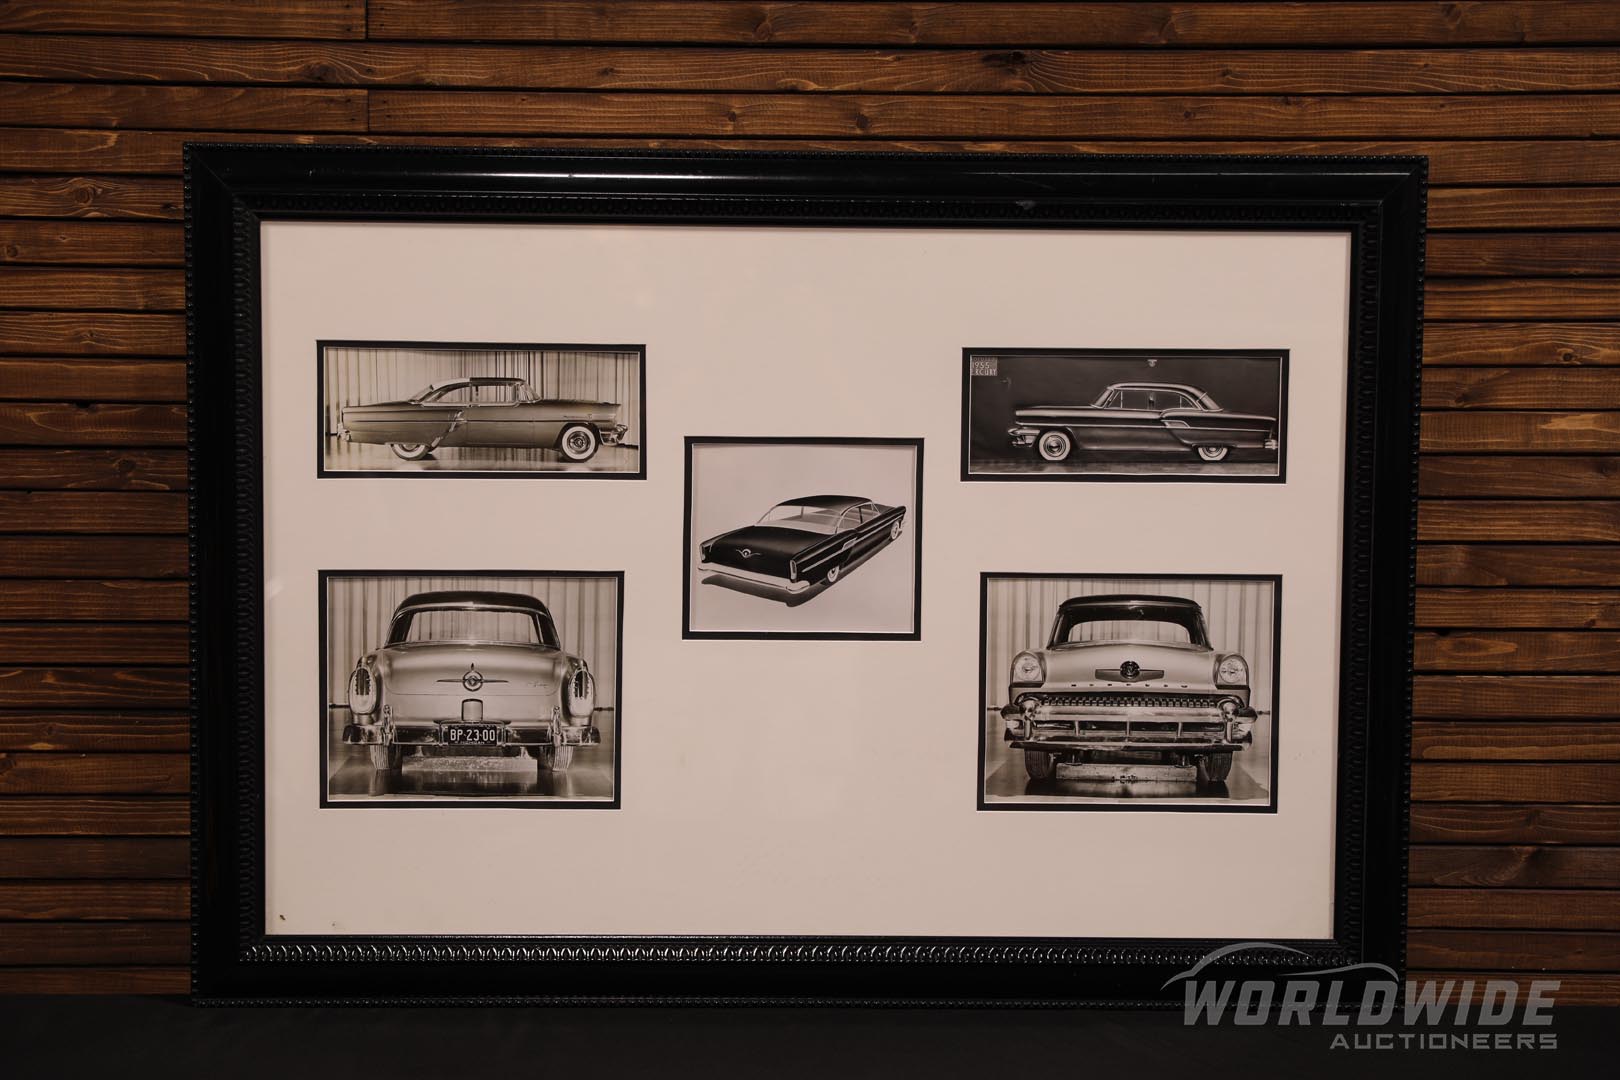 1955 Mercury Styling Study Montage - Framed and Matted